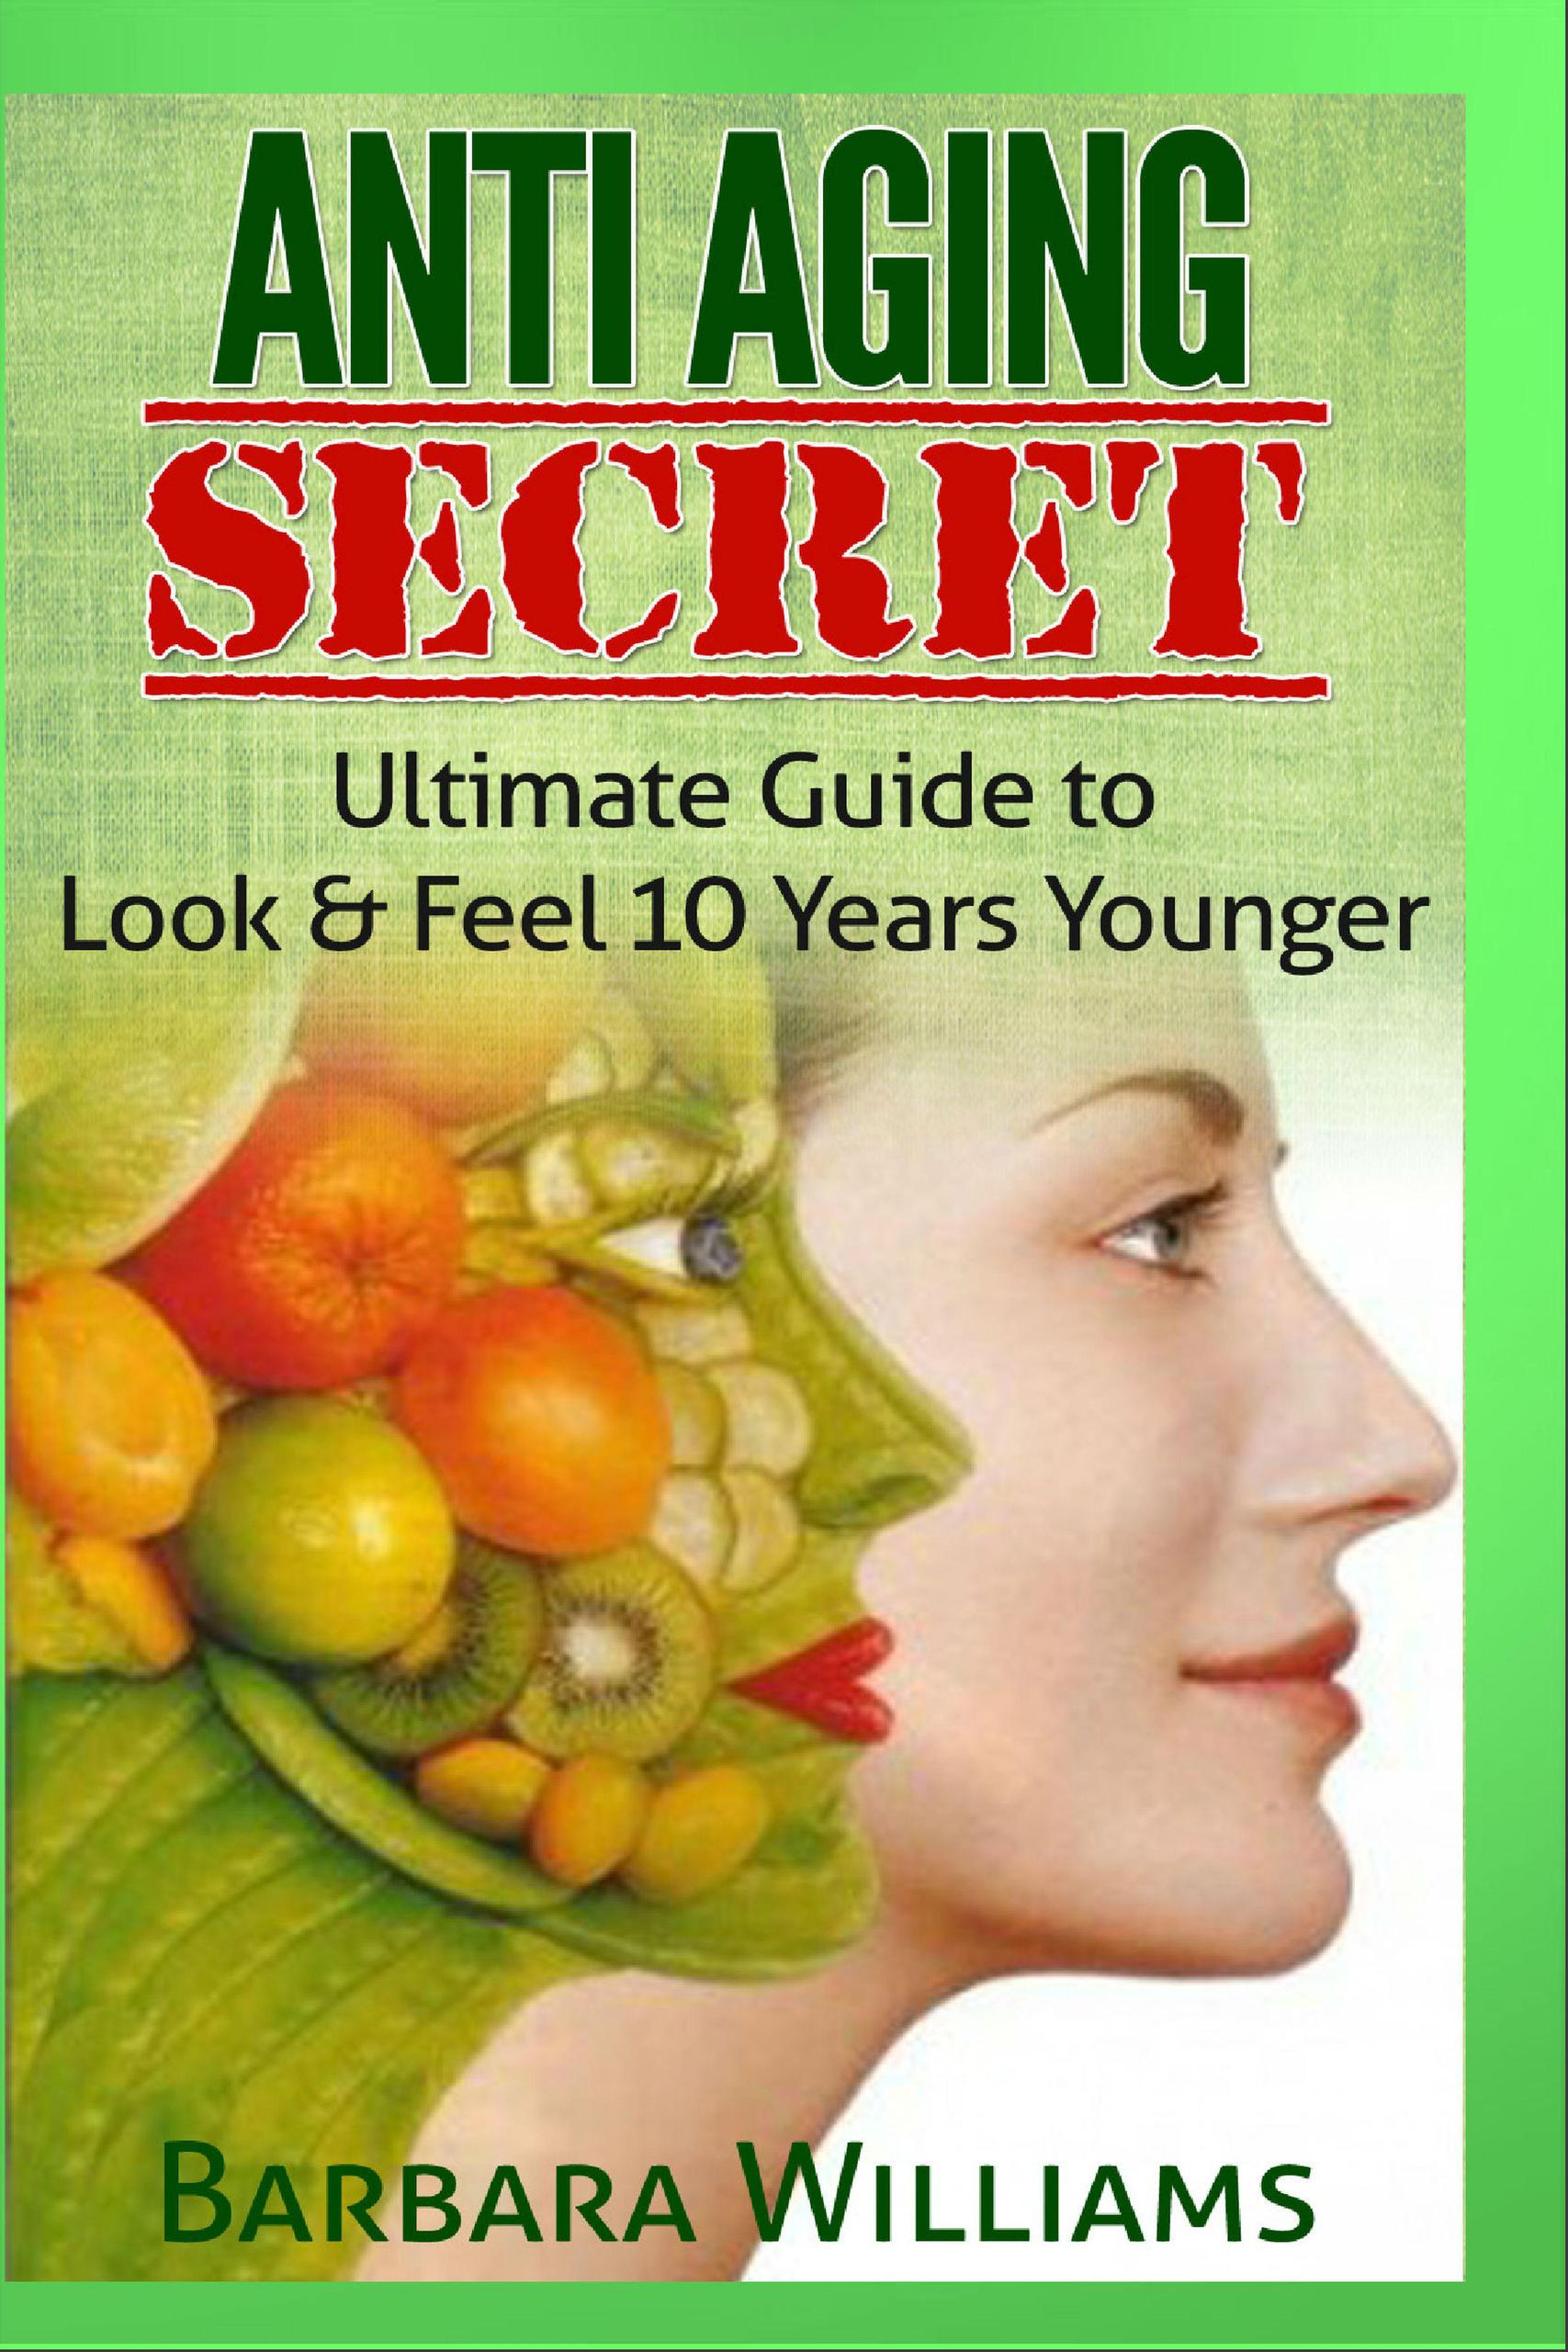 Smashwords Anti Aging Secret Ultimate Guide To Look And Feel 10 Years